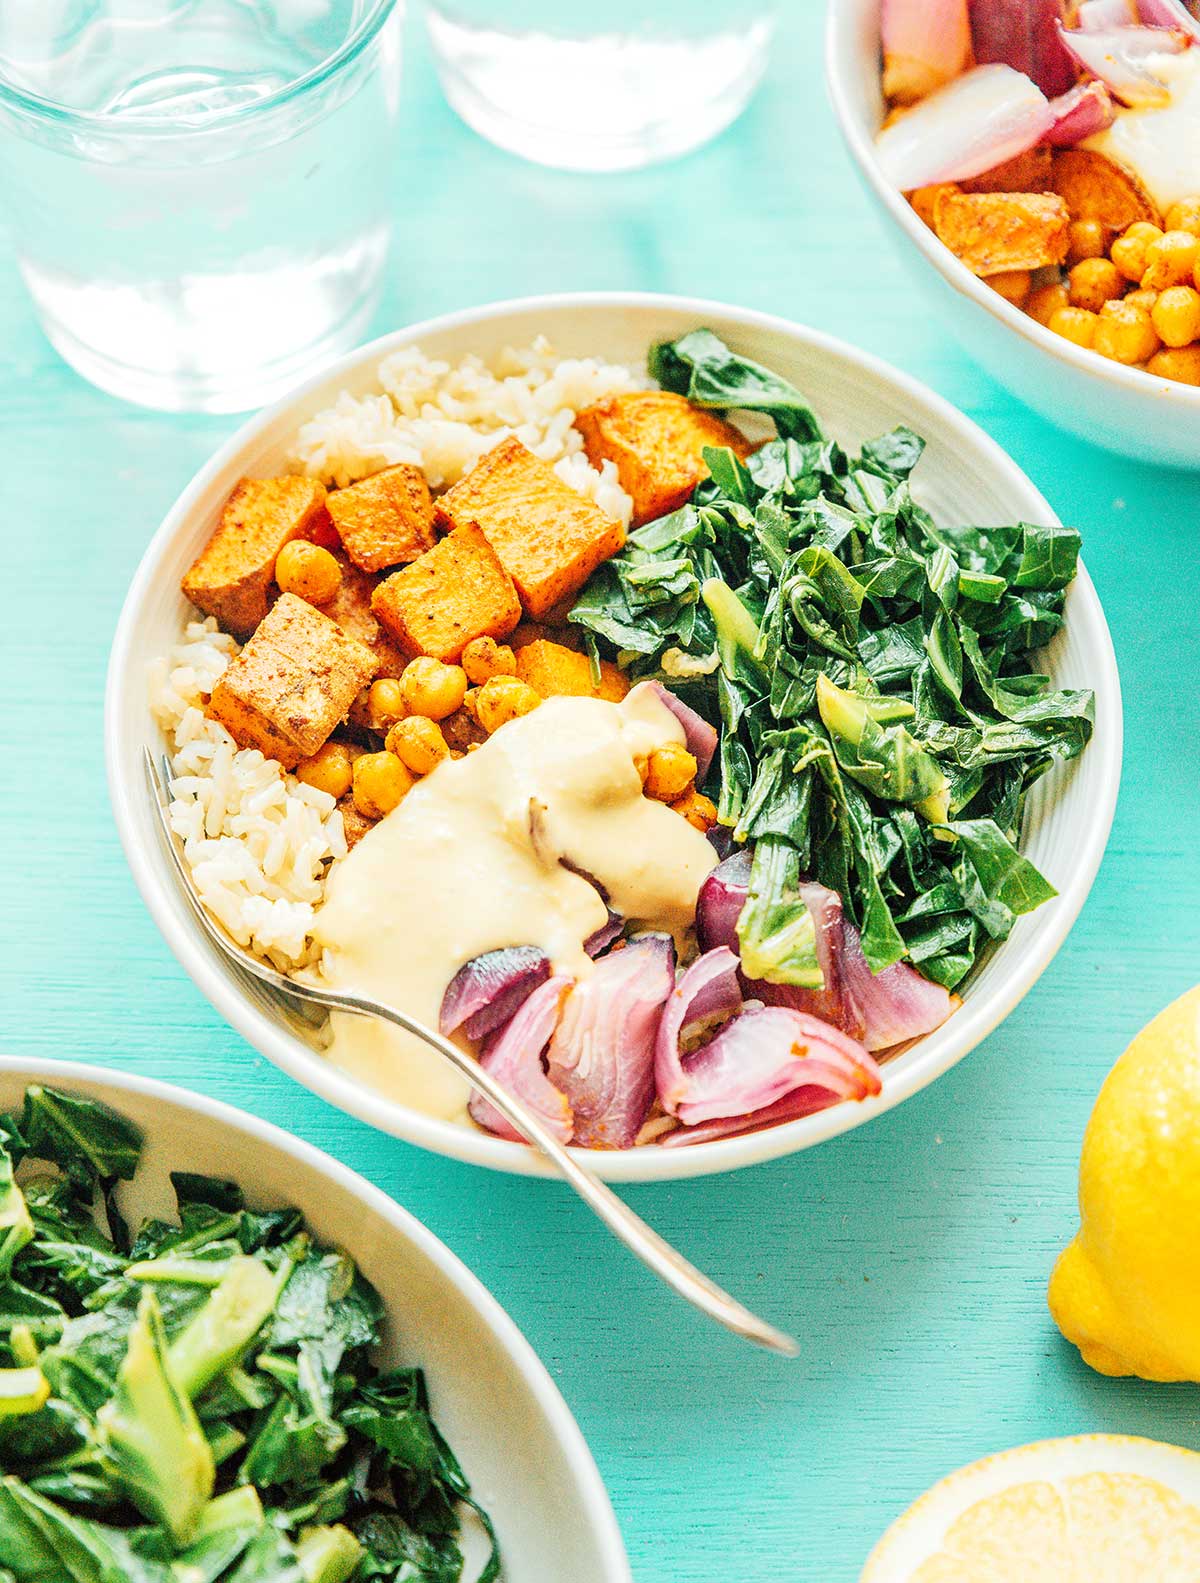 A southern style grain bowl filled with sweet potatoes, veggies, collard greens, red onion, and rice, and topped with a hummus and lemon juice sauce